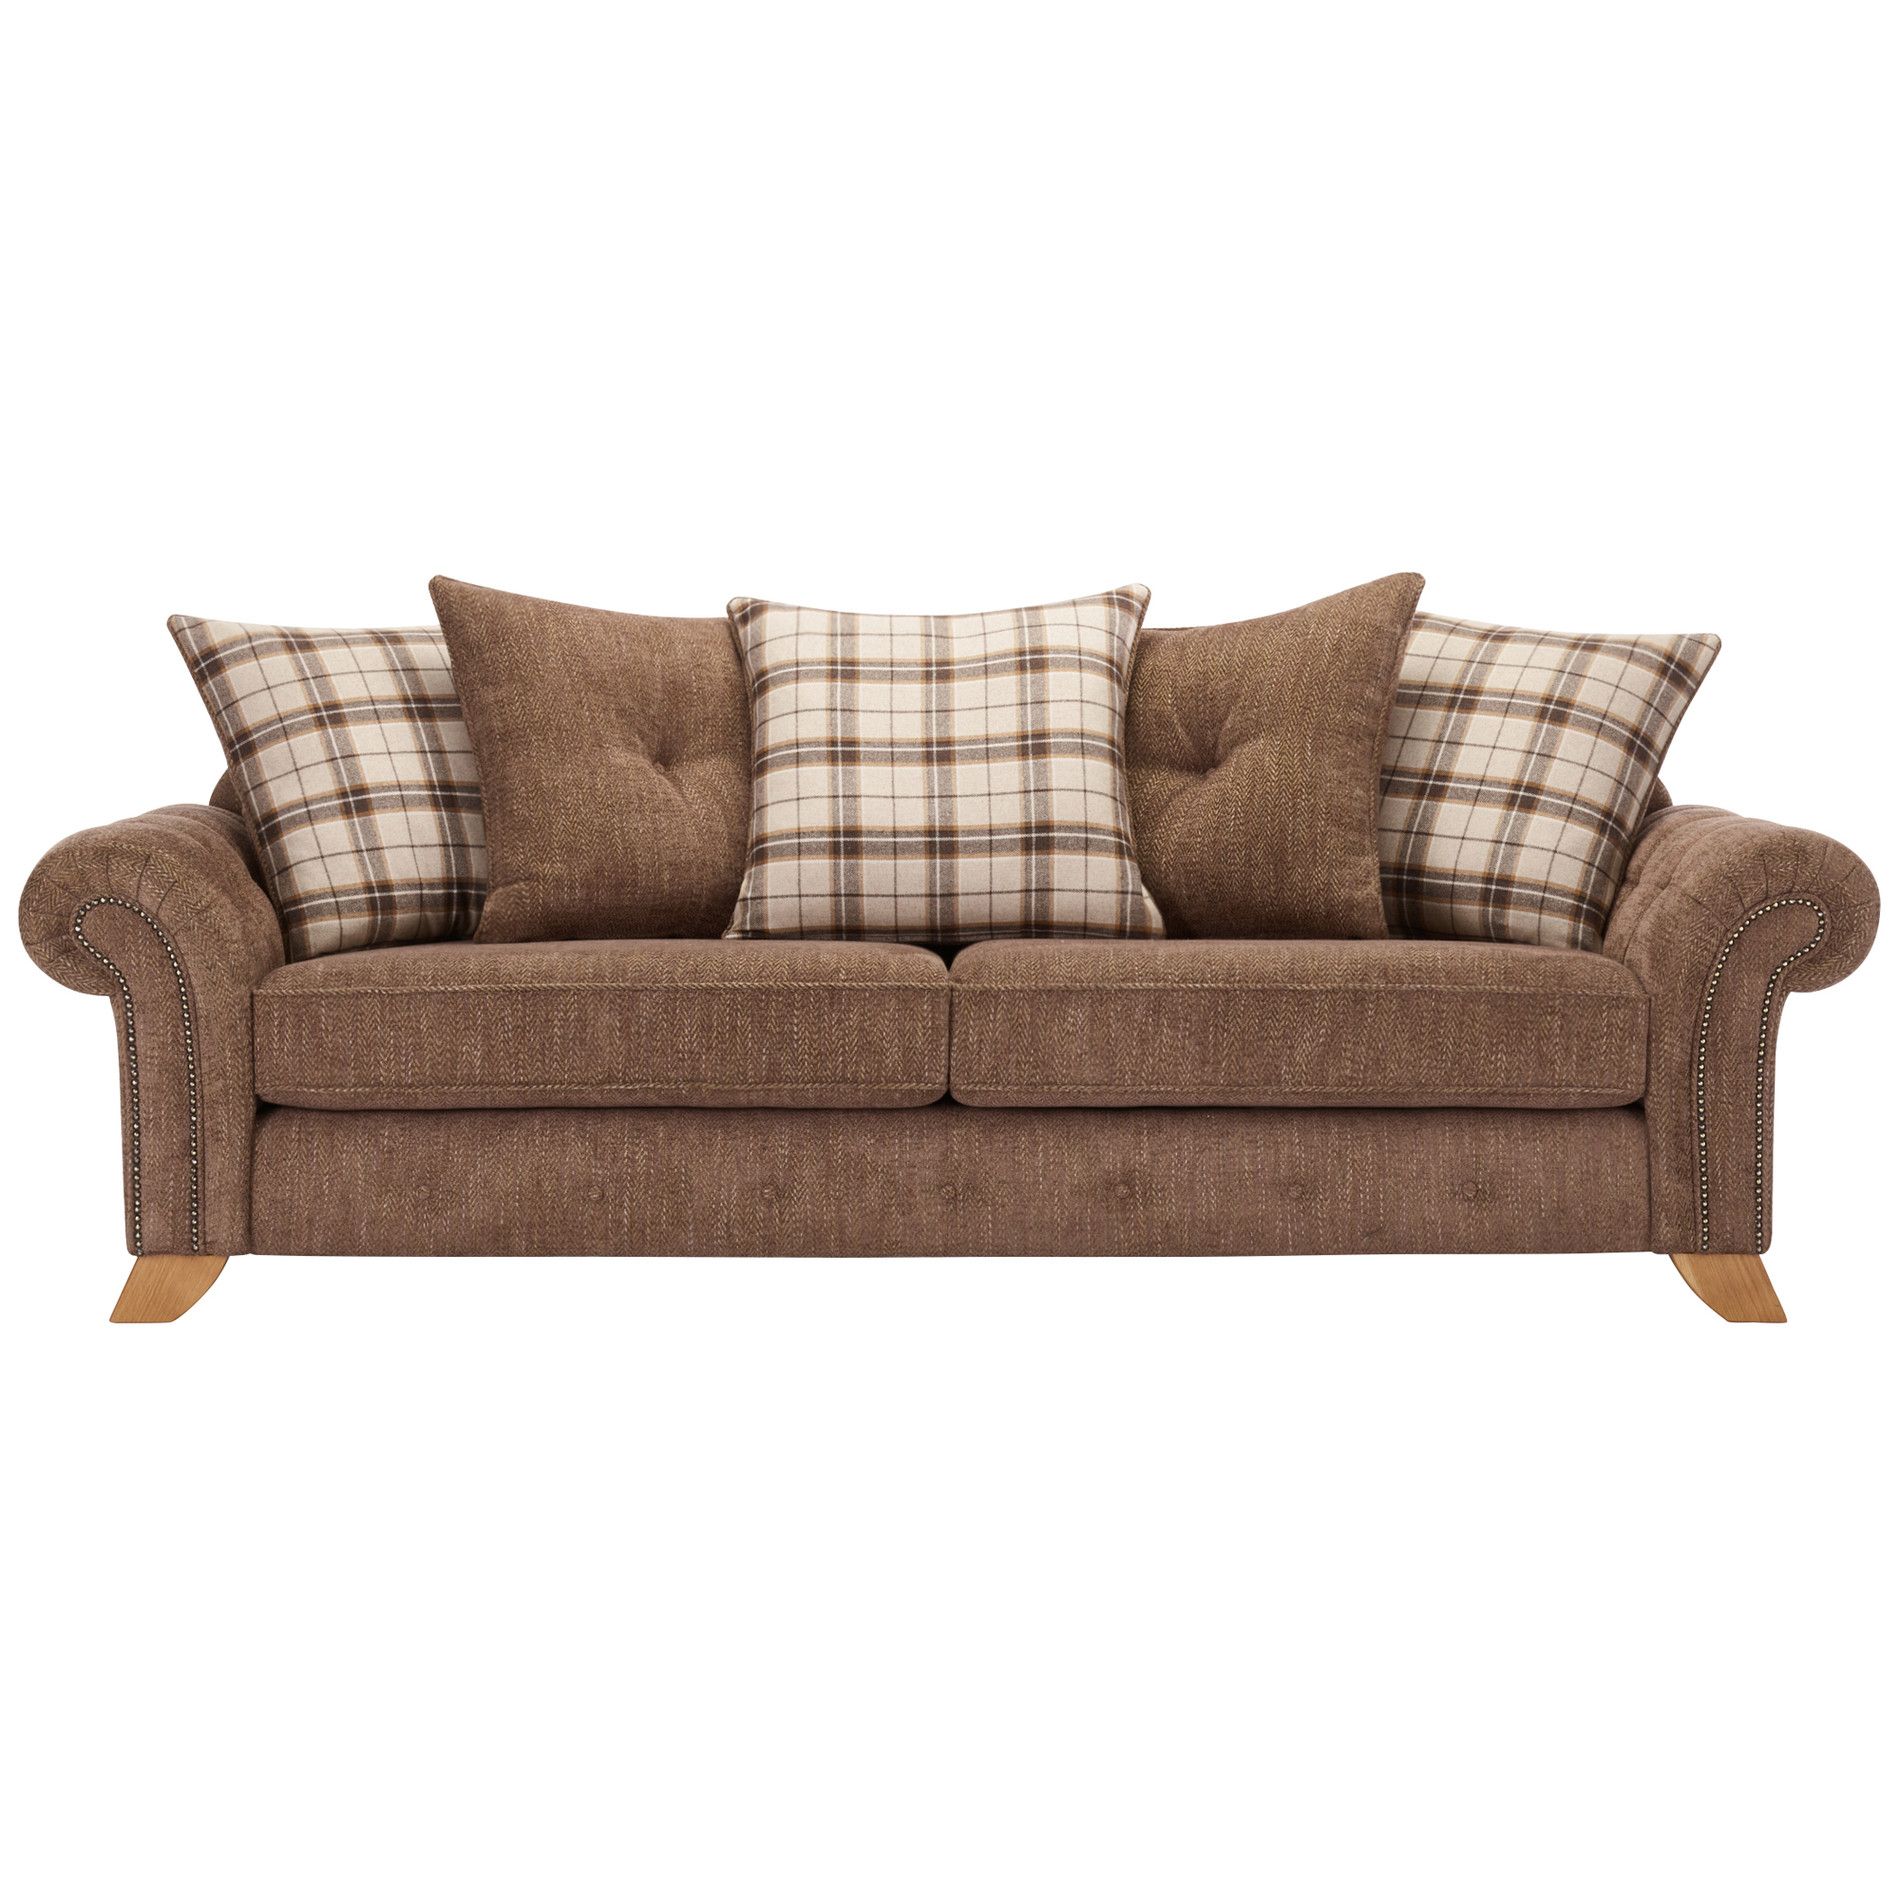 Montana 4 Seater Sofa With Pillow Back In Brown Fabric Throughout Lyvia Pillowback Sofa Sectional Sofas (View 13 of 15)